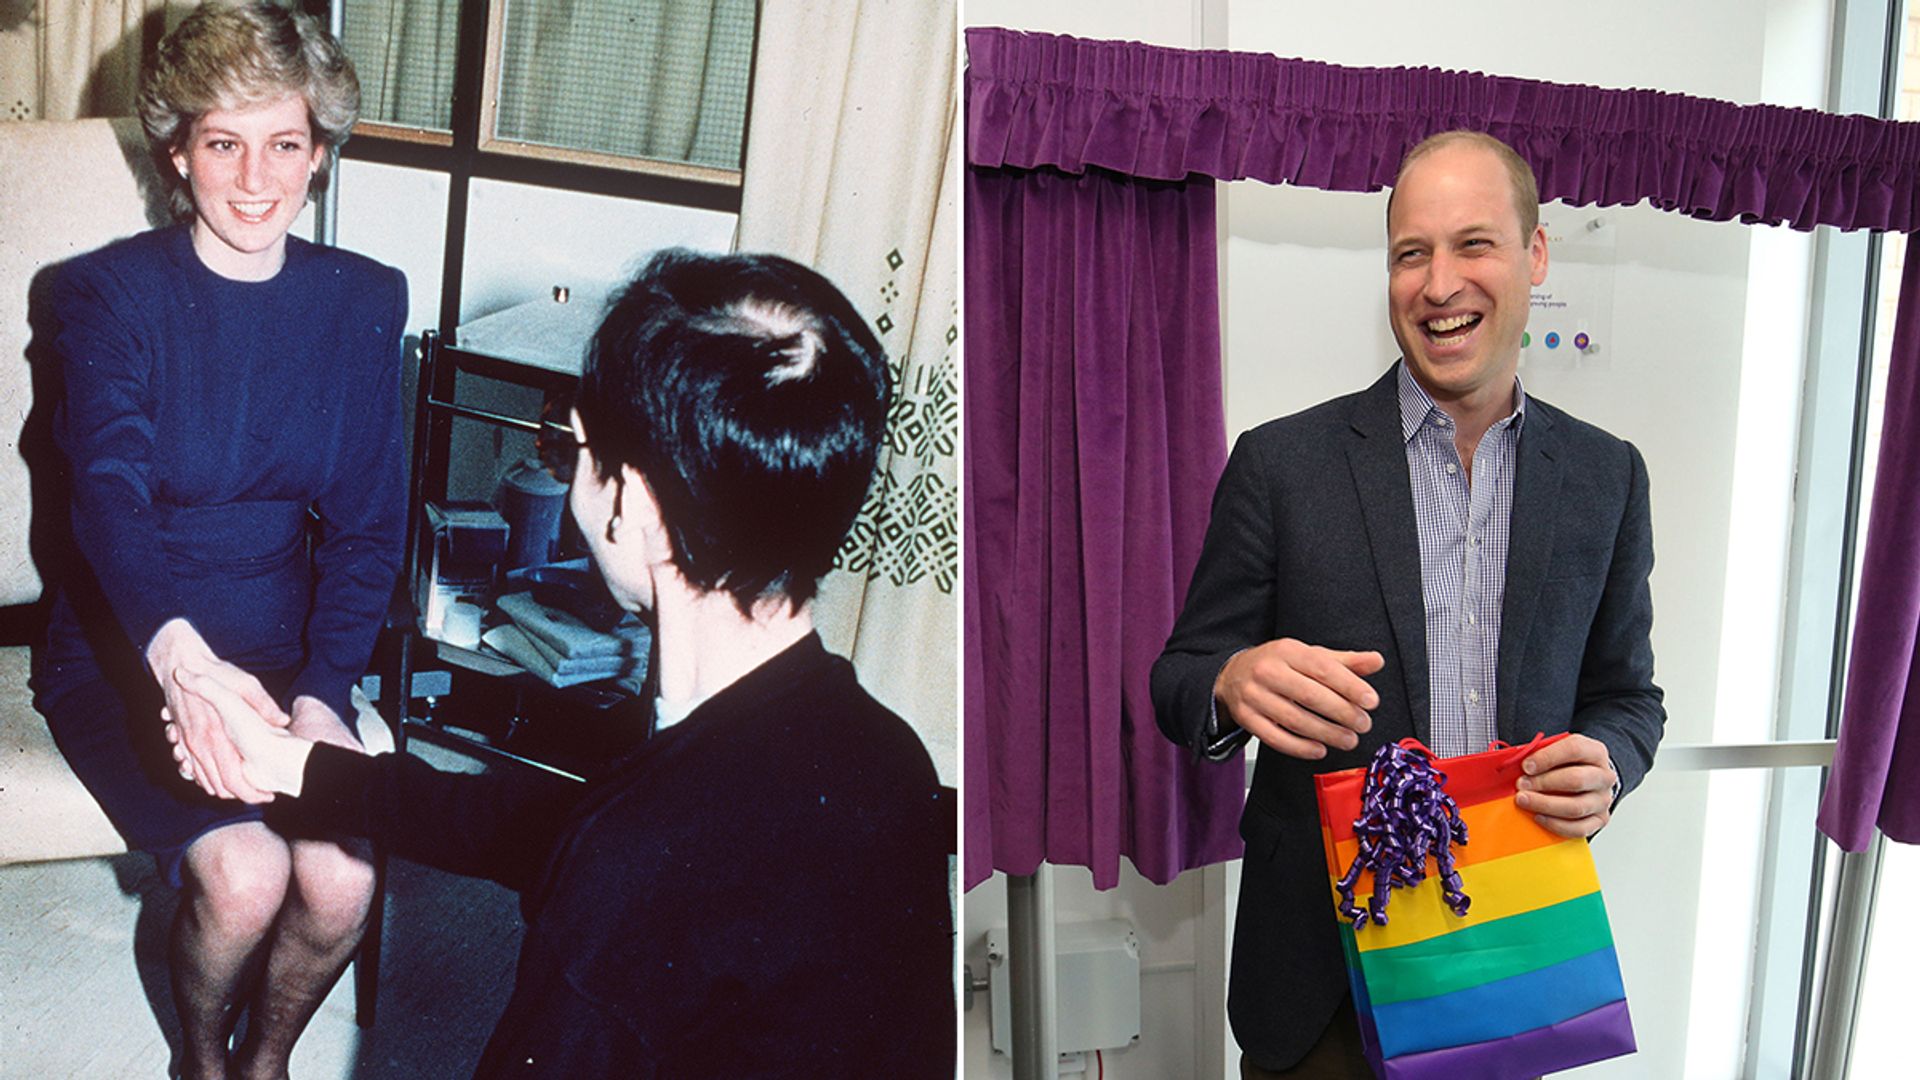 Split image of Princess Diana shaking hands with a HIV patient and Prince William carrying a rainbow-coloured bag